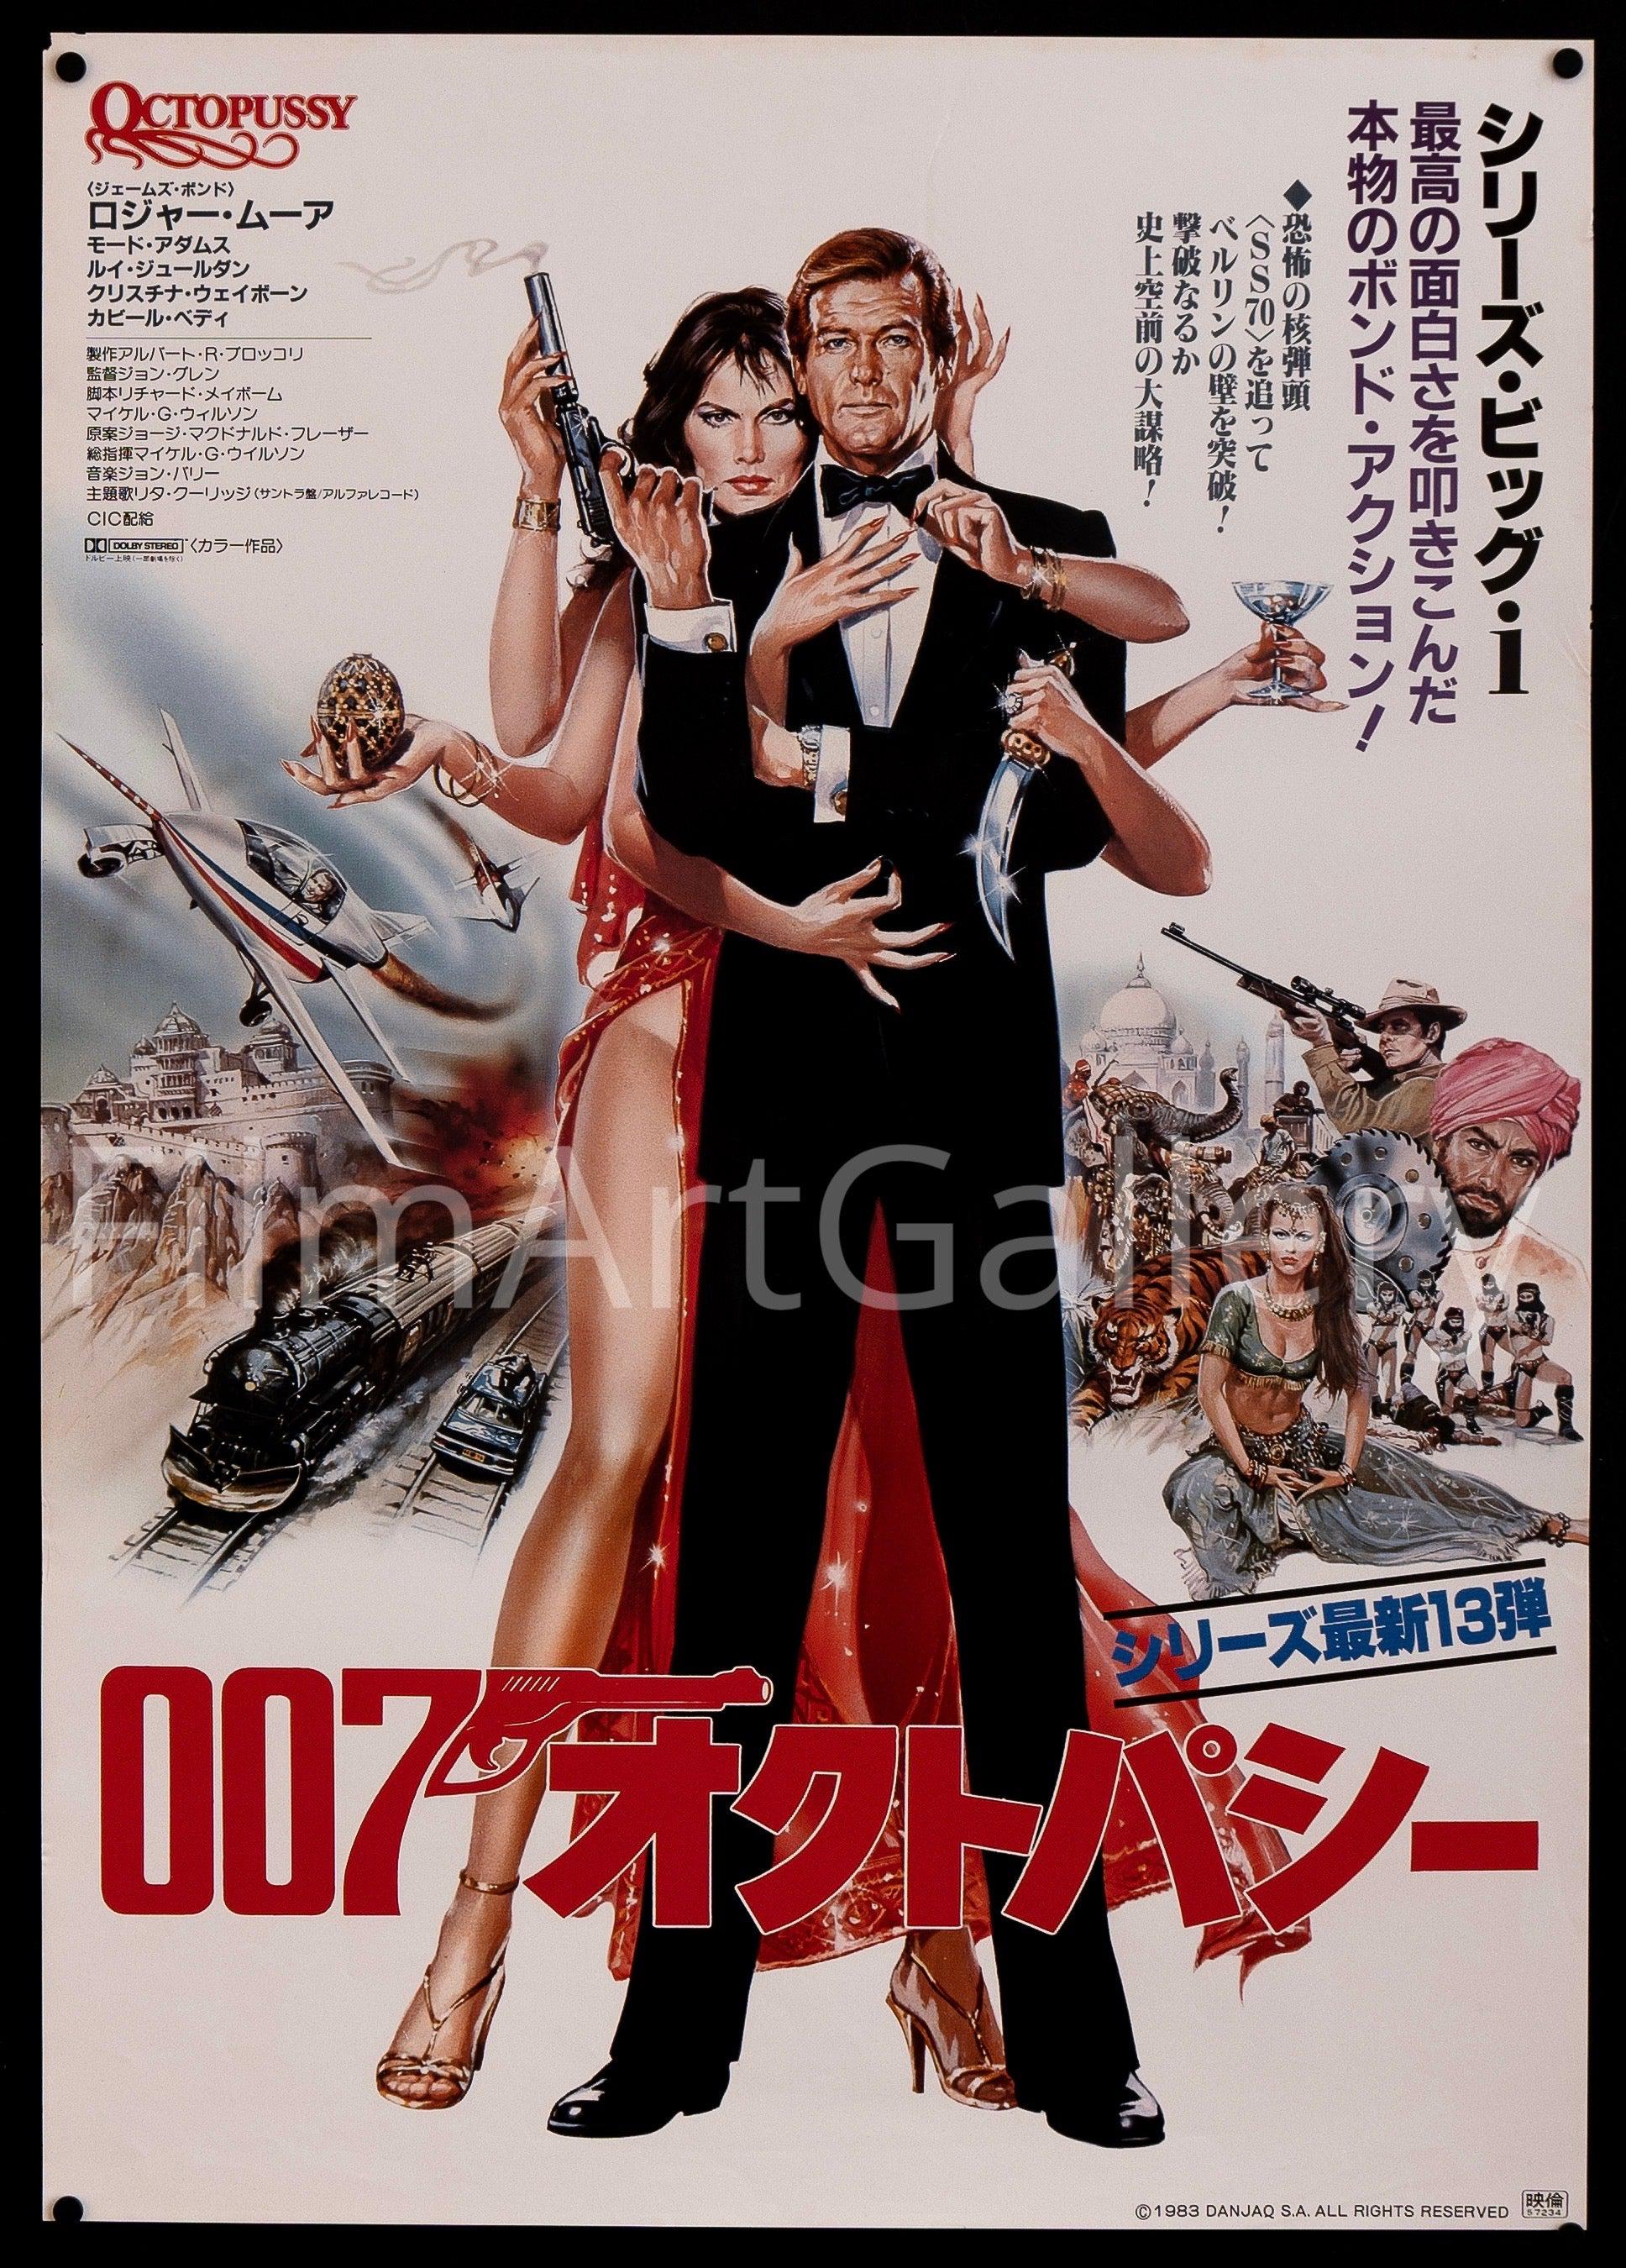 Octopussy Movie Poster 1983 Japanese 1 panel (20x29)